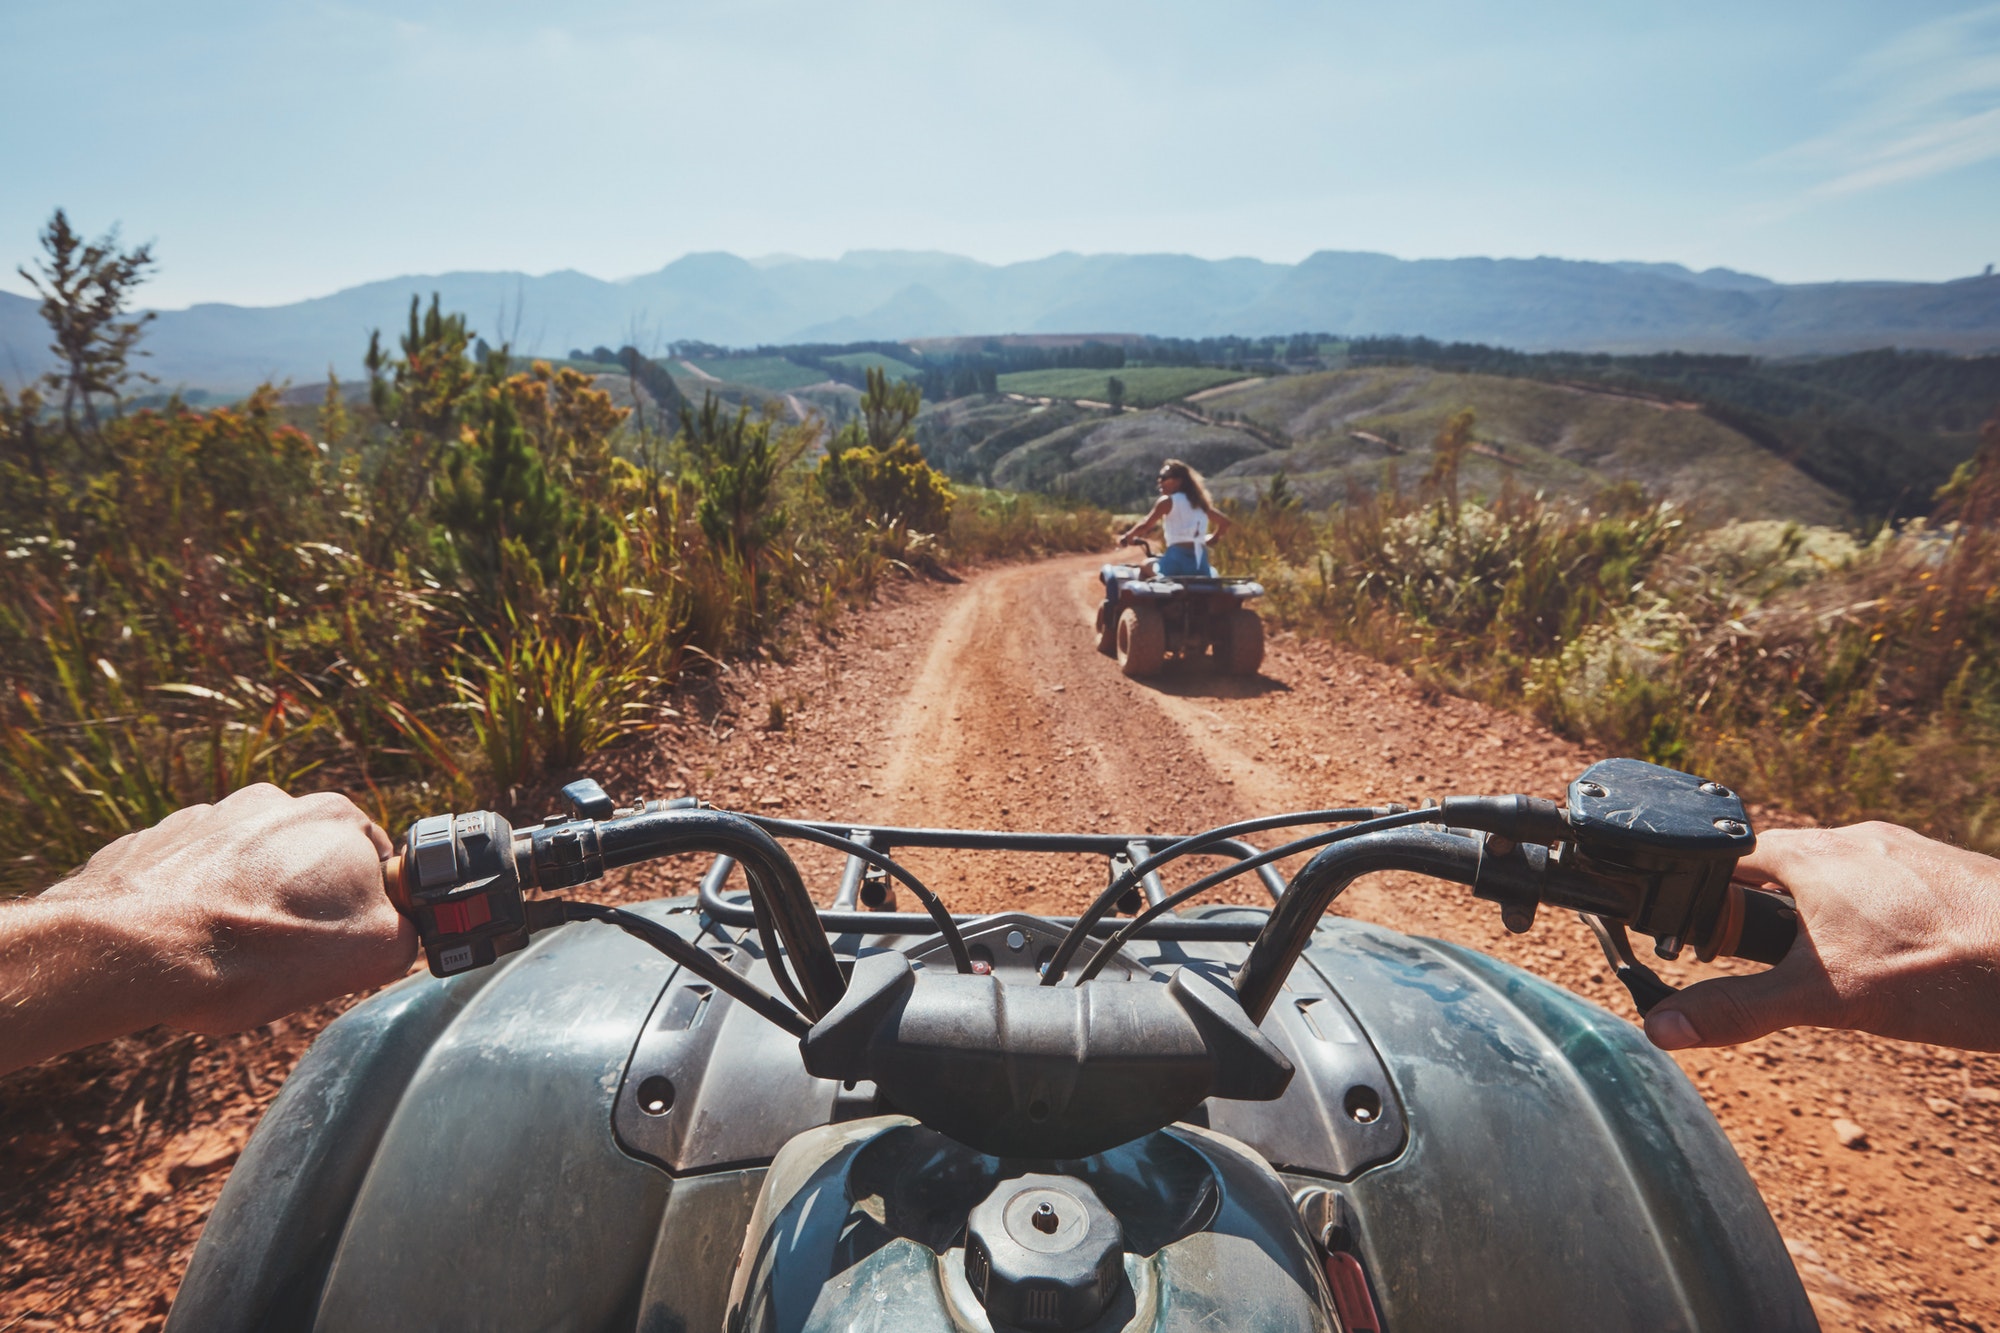 View from a quad bike in nature